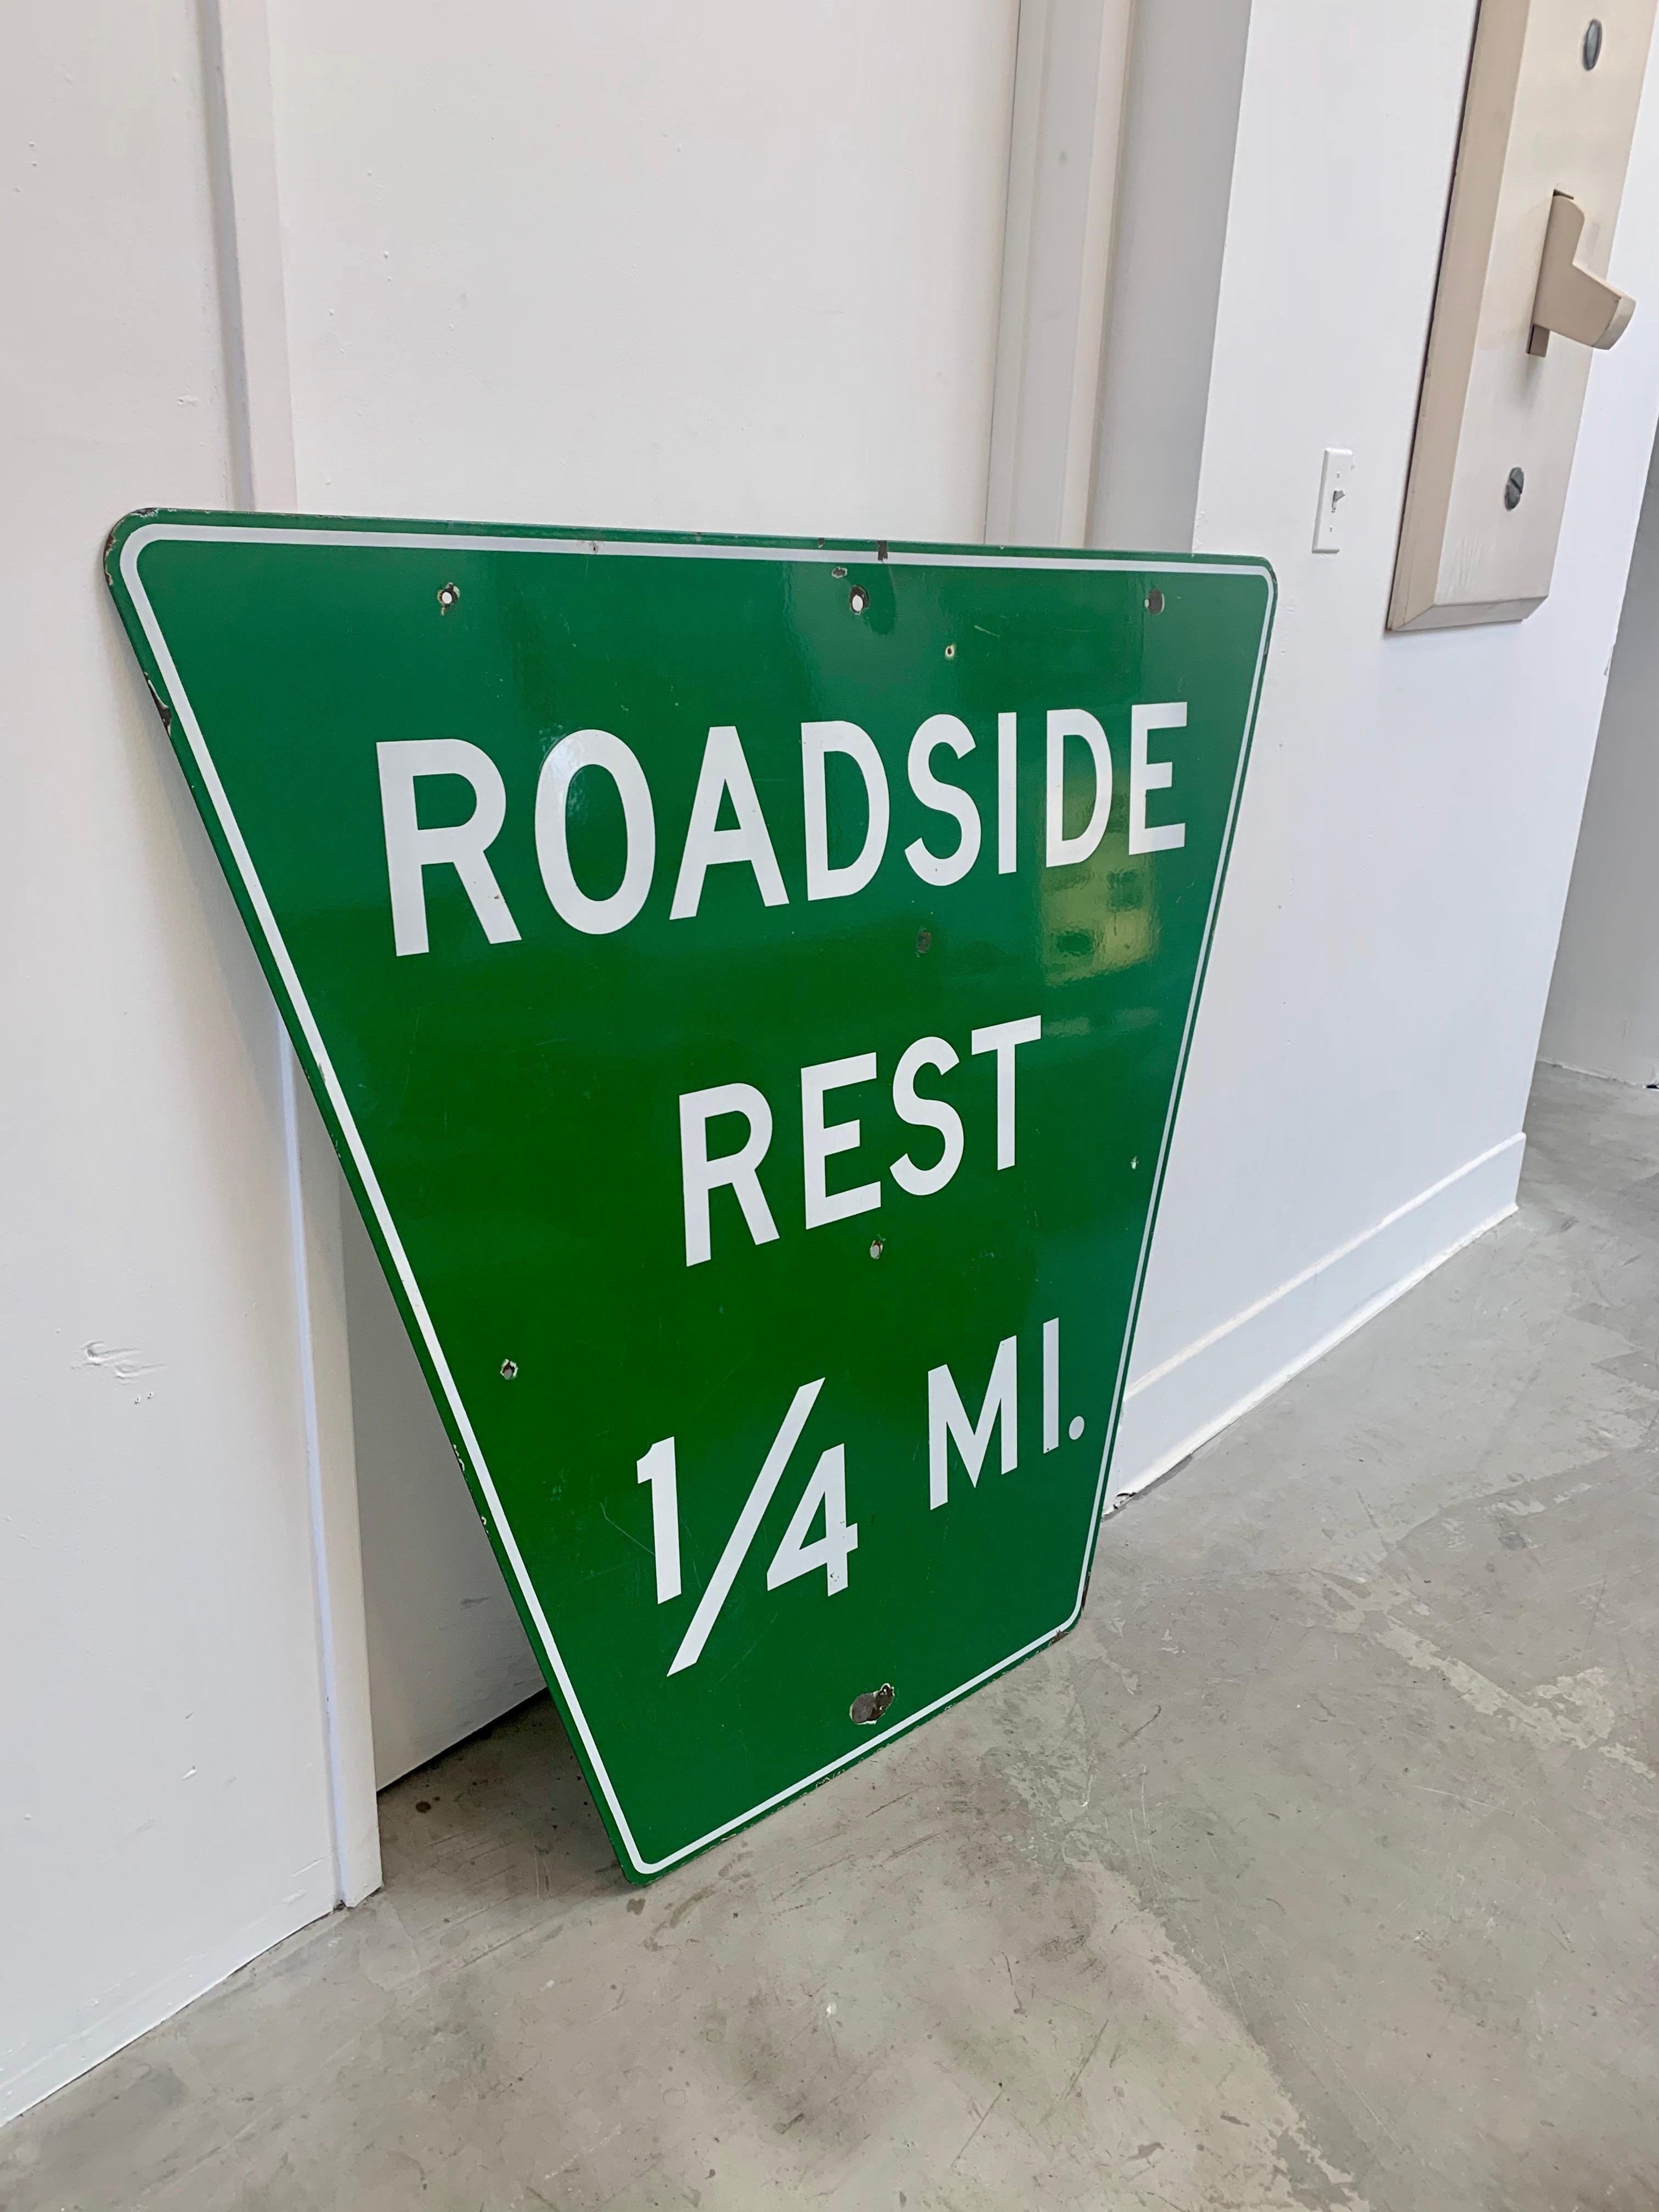 Super rare vintage porcelain highway sign. Great green coloring with white lettering. Retired highway sign letting drivers know there is a place to pull over and rest a quarter mile ahead. Bygone sign and cool piece of transportation Americana. Sign